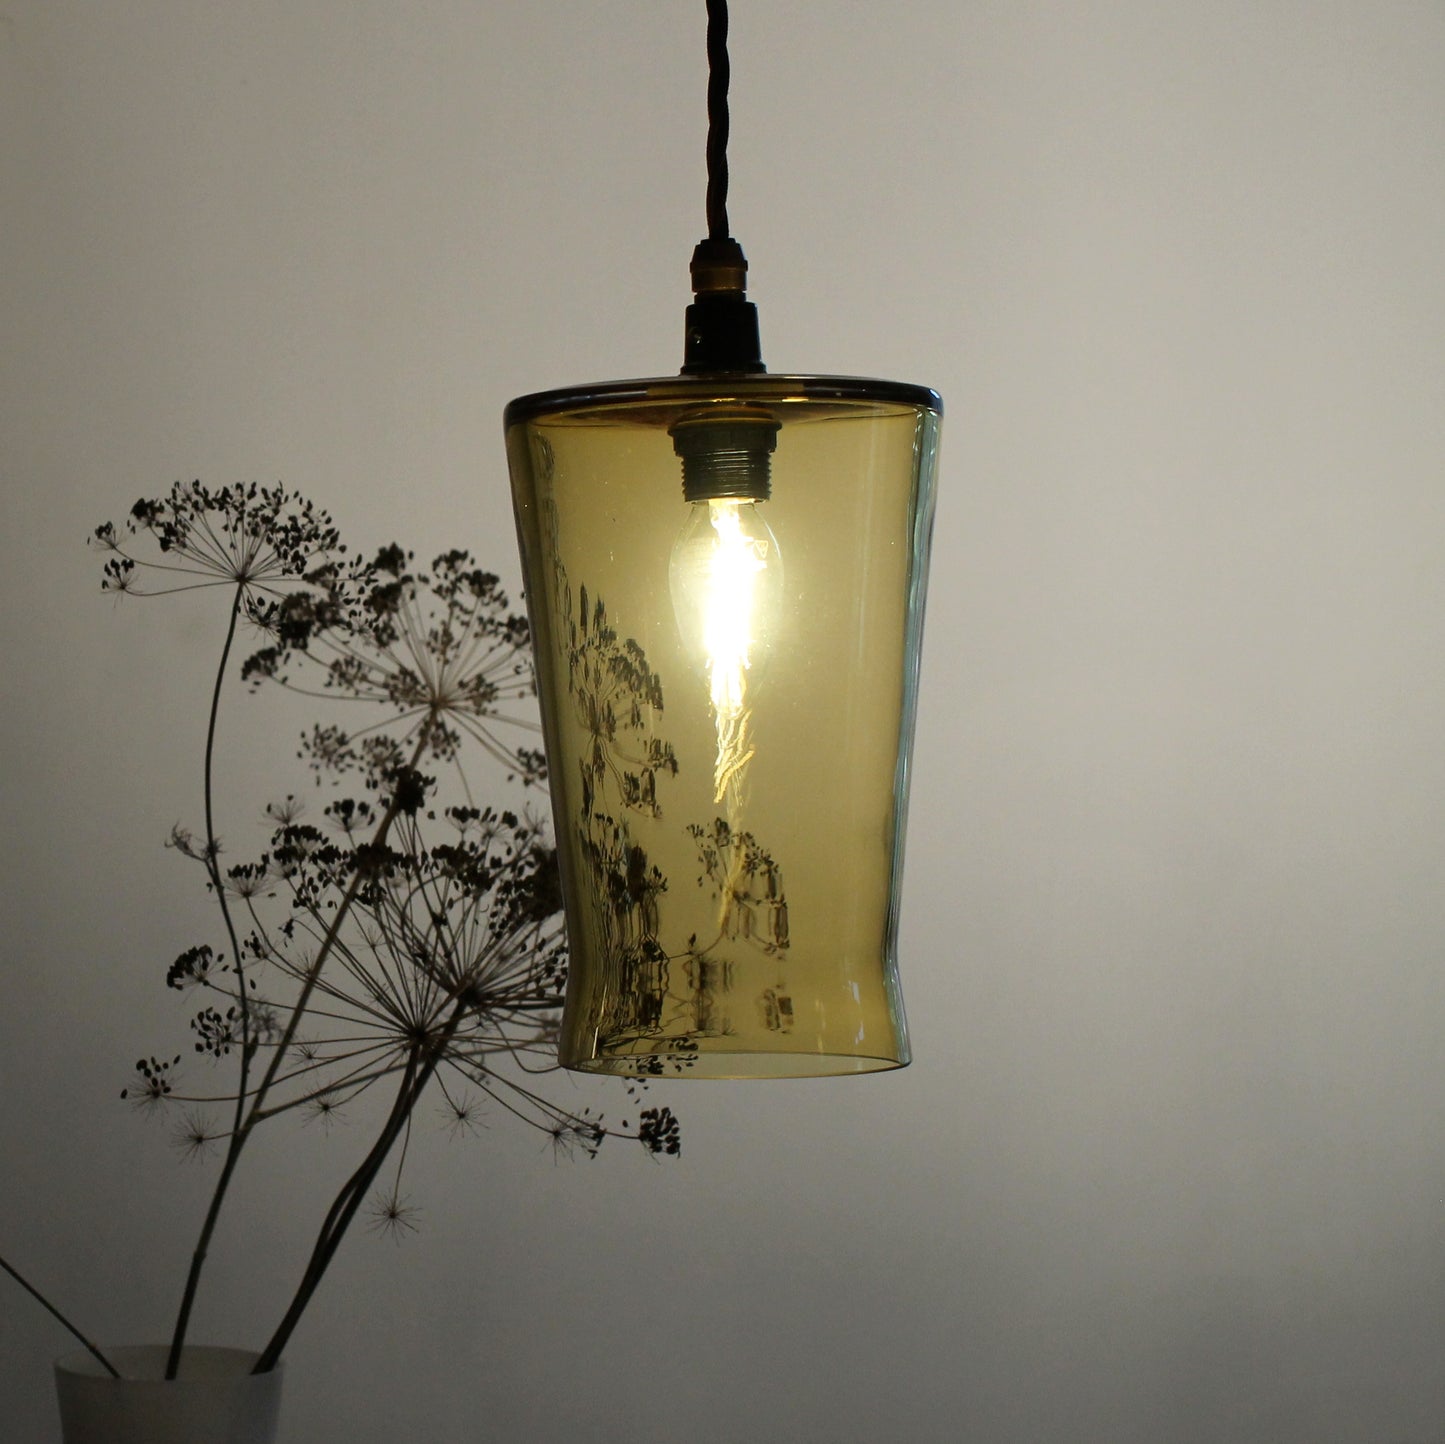 Waisted Flat Top Pendant in Honey, Elegant glass lighting, Contemporary lighting by One Foot Taller, Quality glass pendant